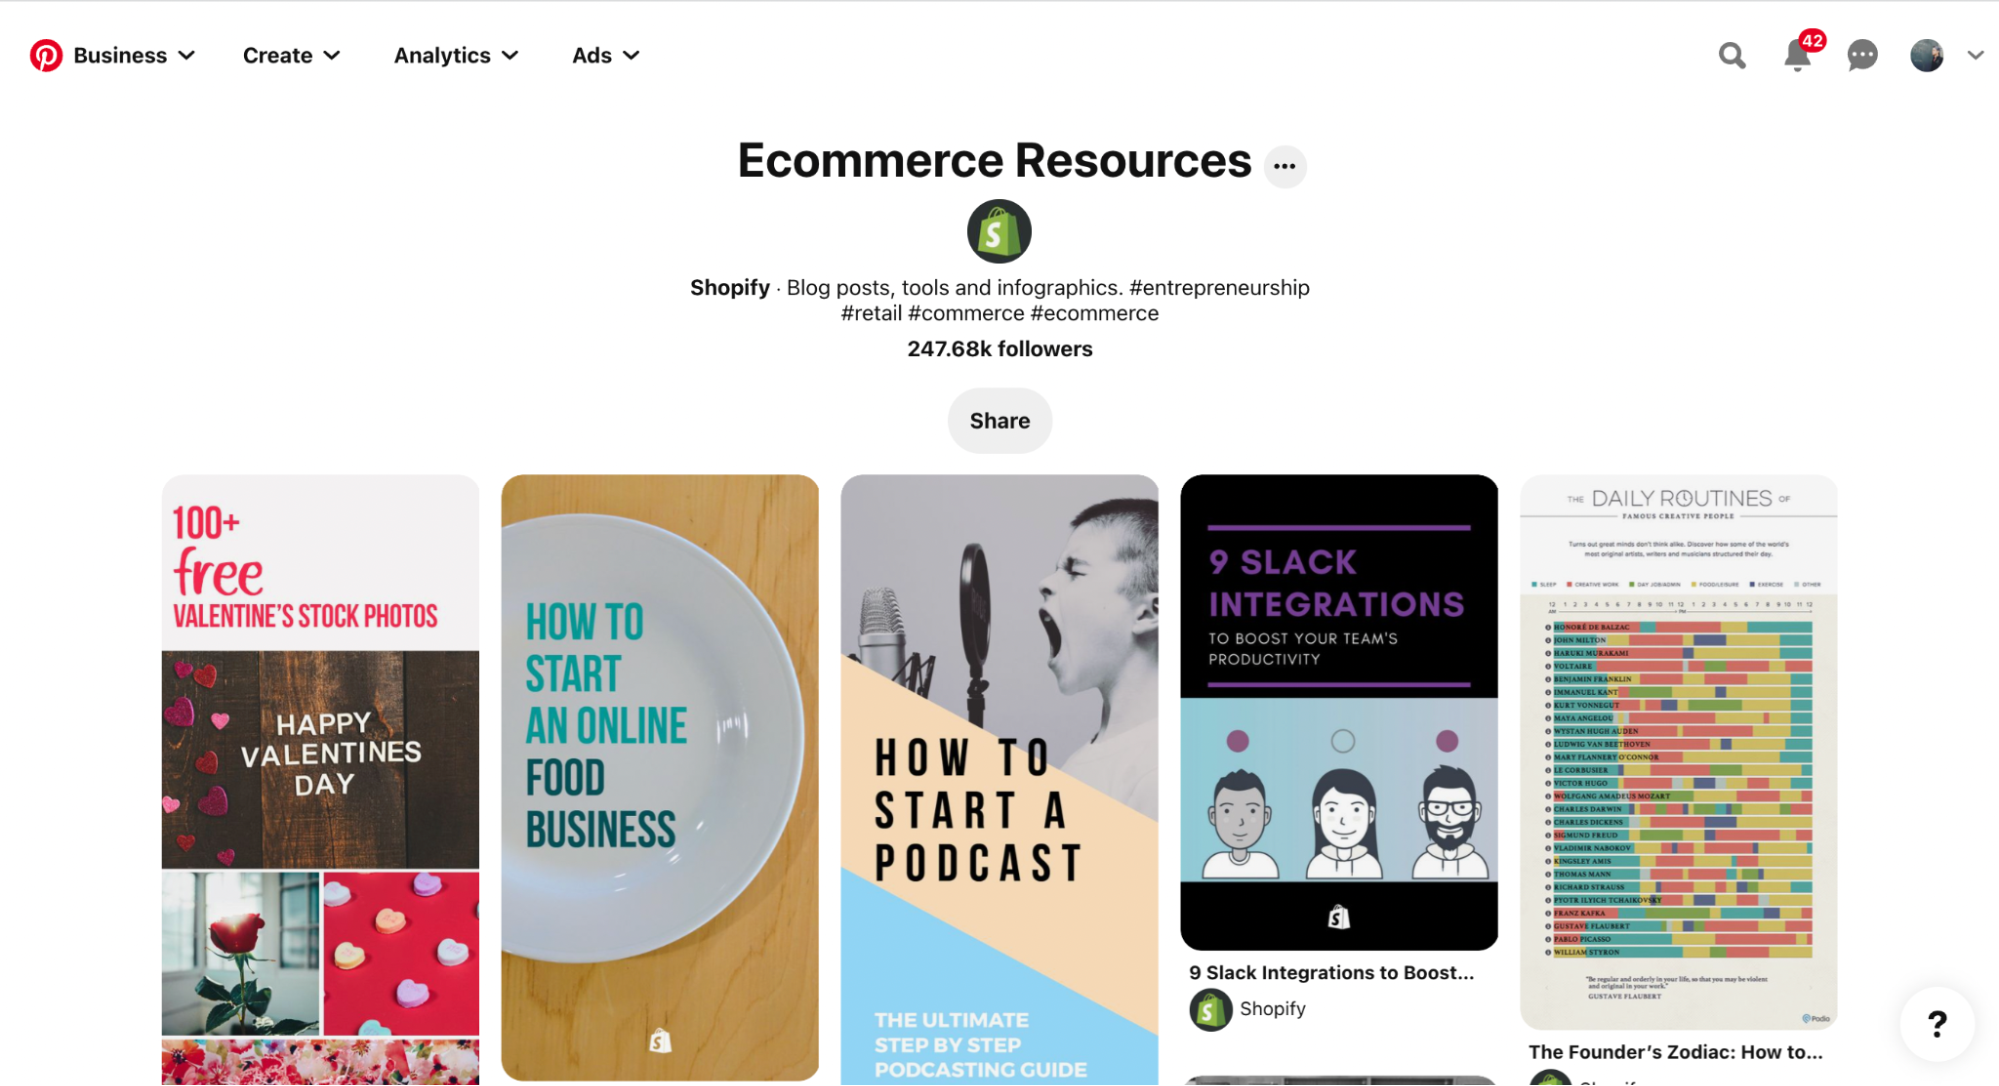 Shopify's Ecommerce Resources Pinterest board